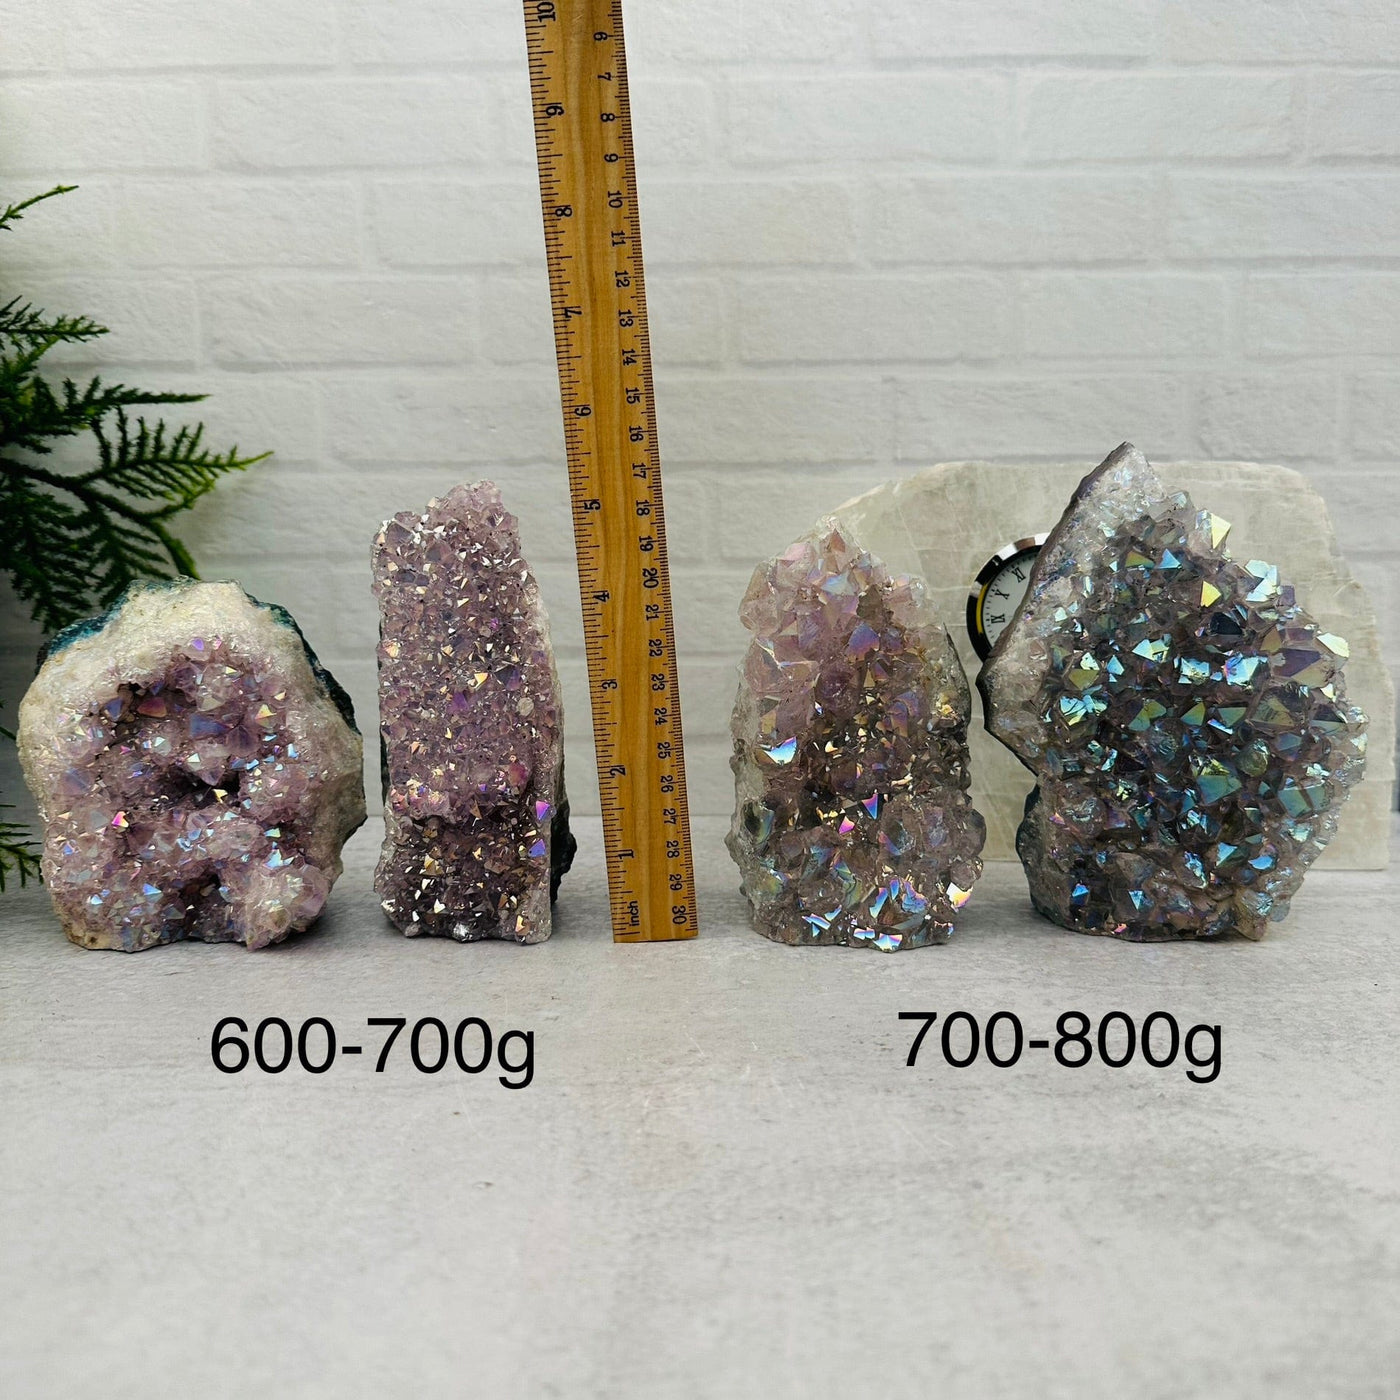 Amethyst Druzy Crystal Cut Base with Angel Aura by weight next to a ruler for size reference